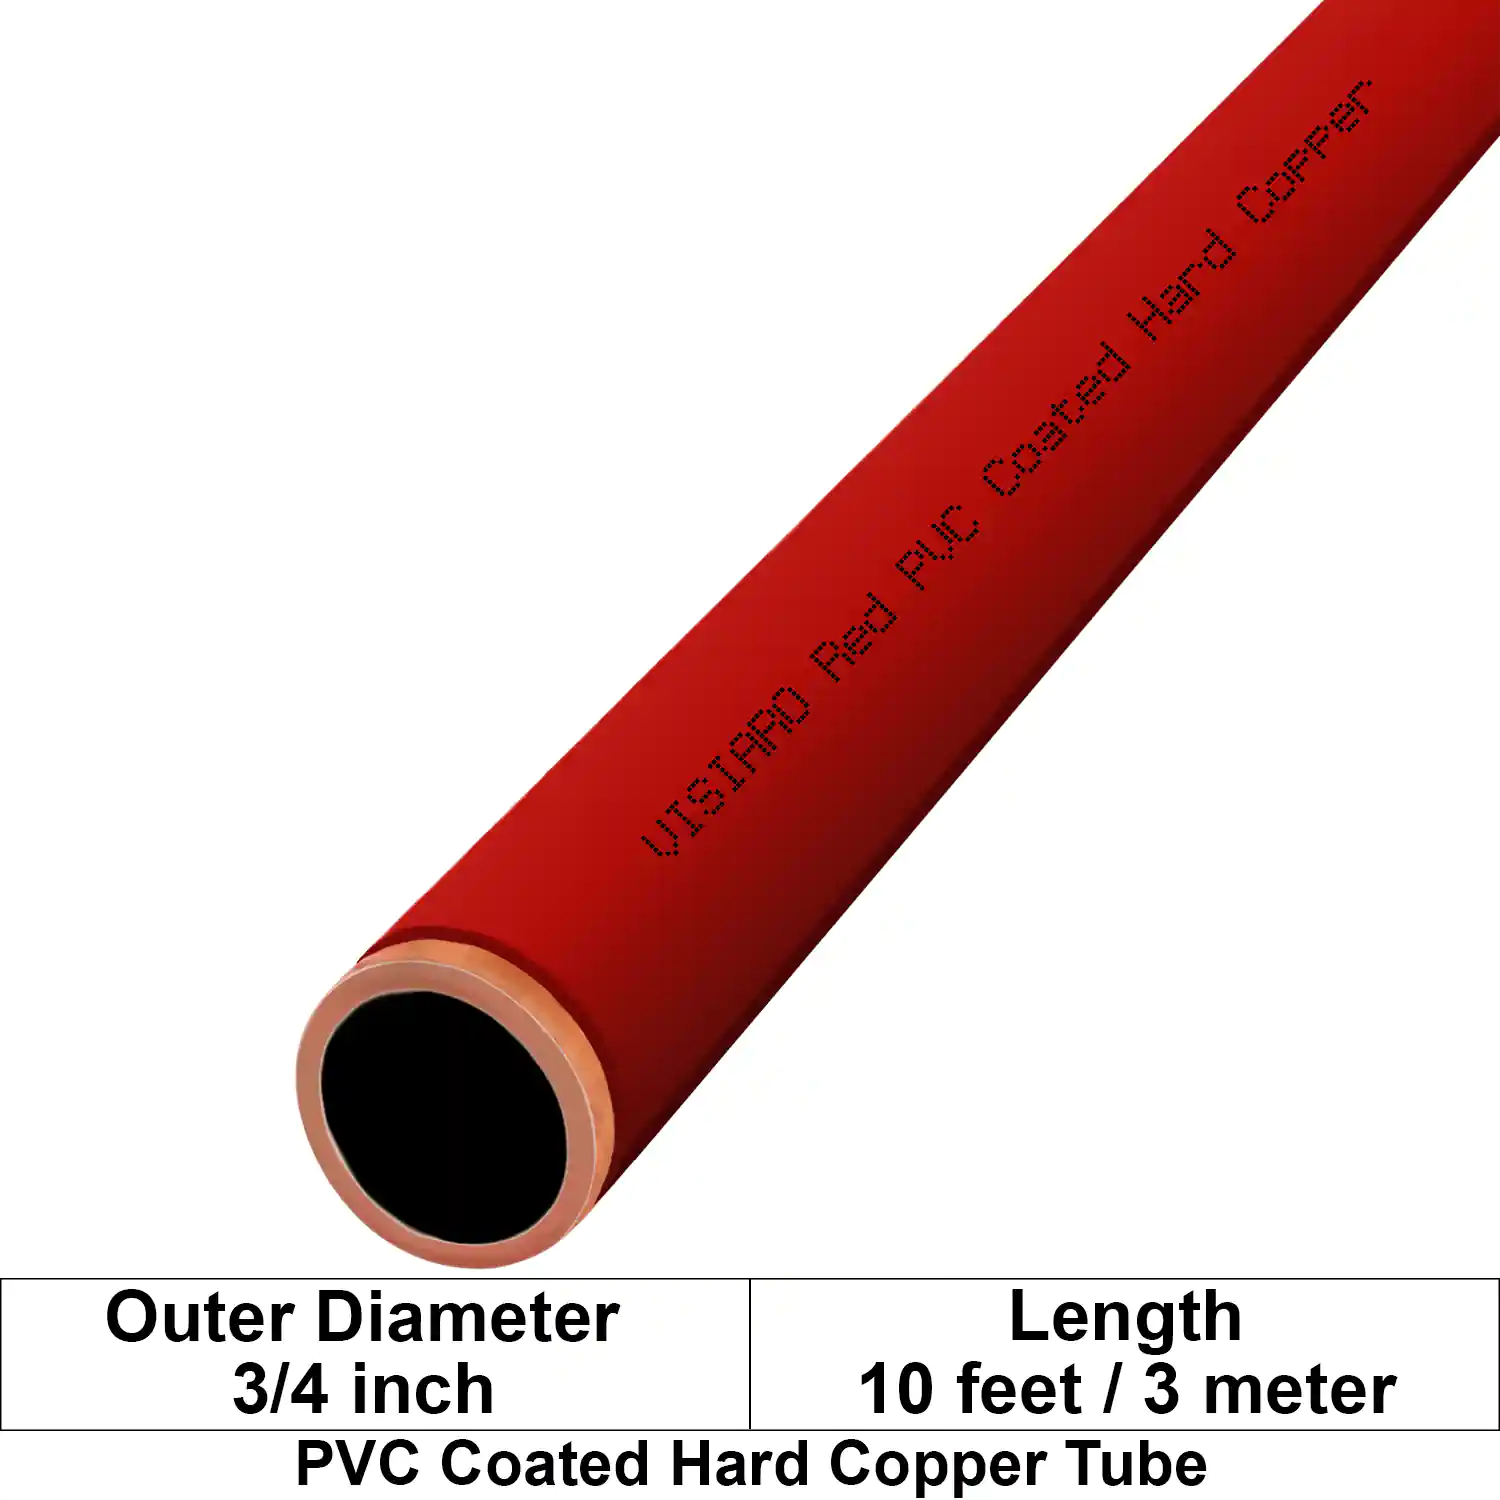 Visiaro Red PVC Coated Hard Copper Tube 10ft long Outer Diameter - 3/4 inch